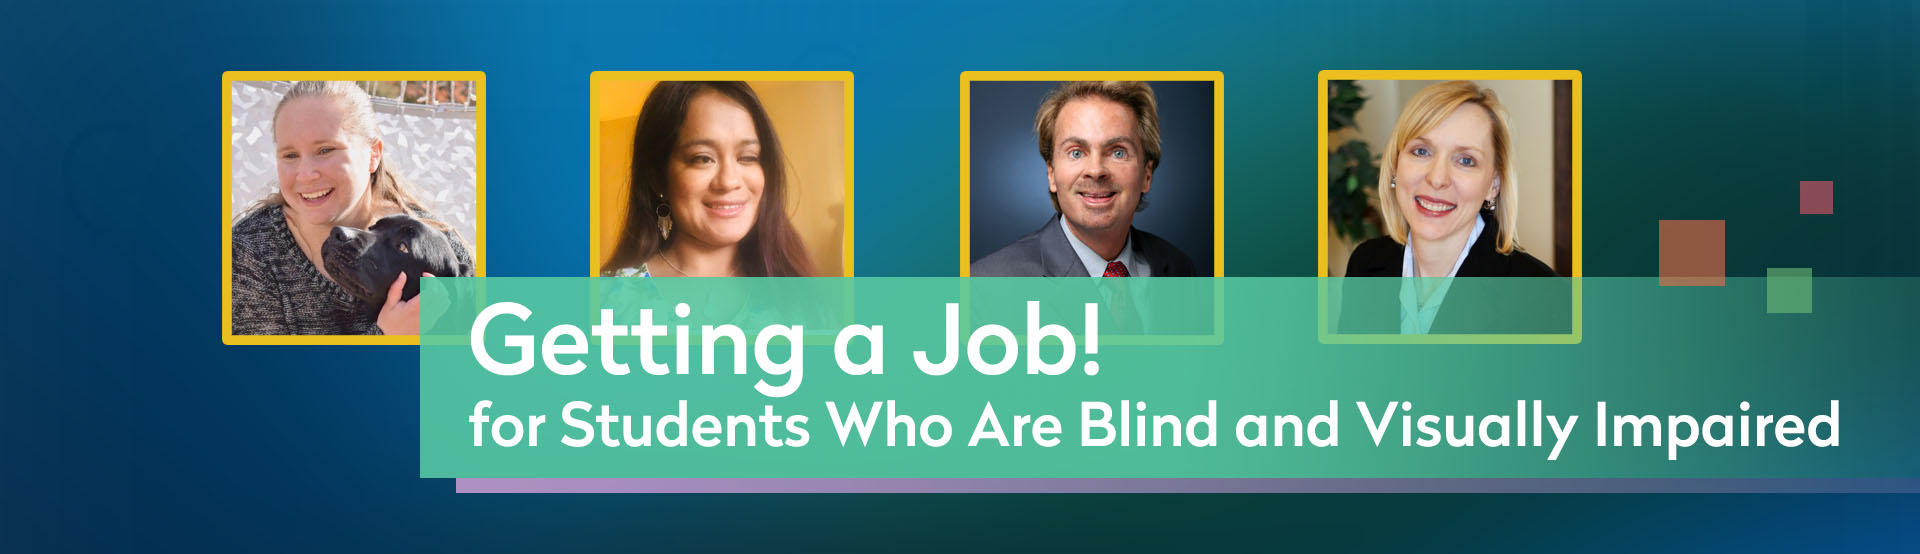 Getting a Job! for Students Who Are Blind and Visually Impaired